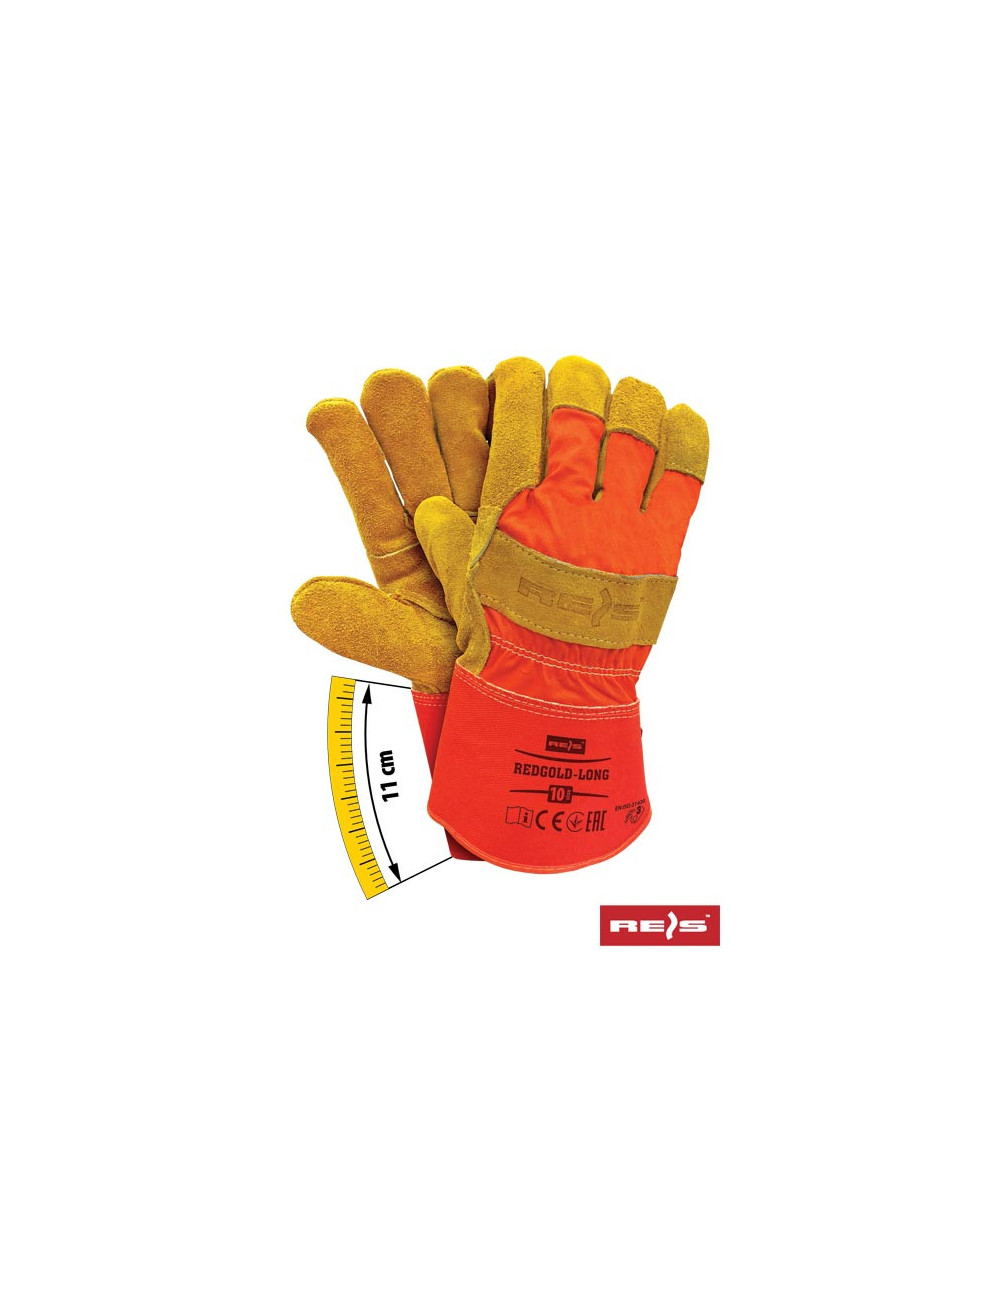 Protective gloves redgold-long cy red-yellow Reis